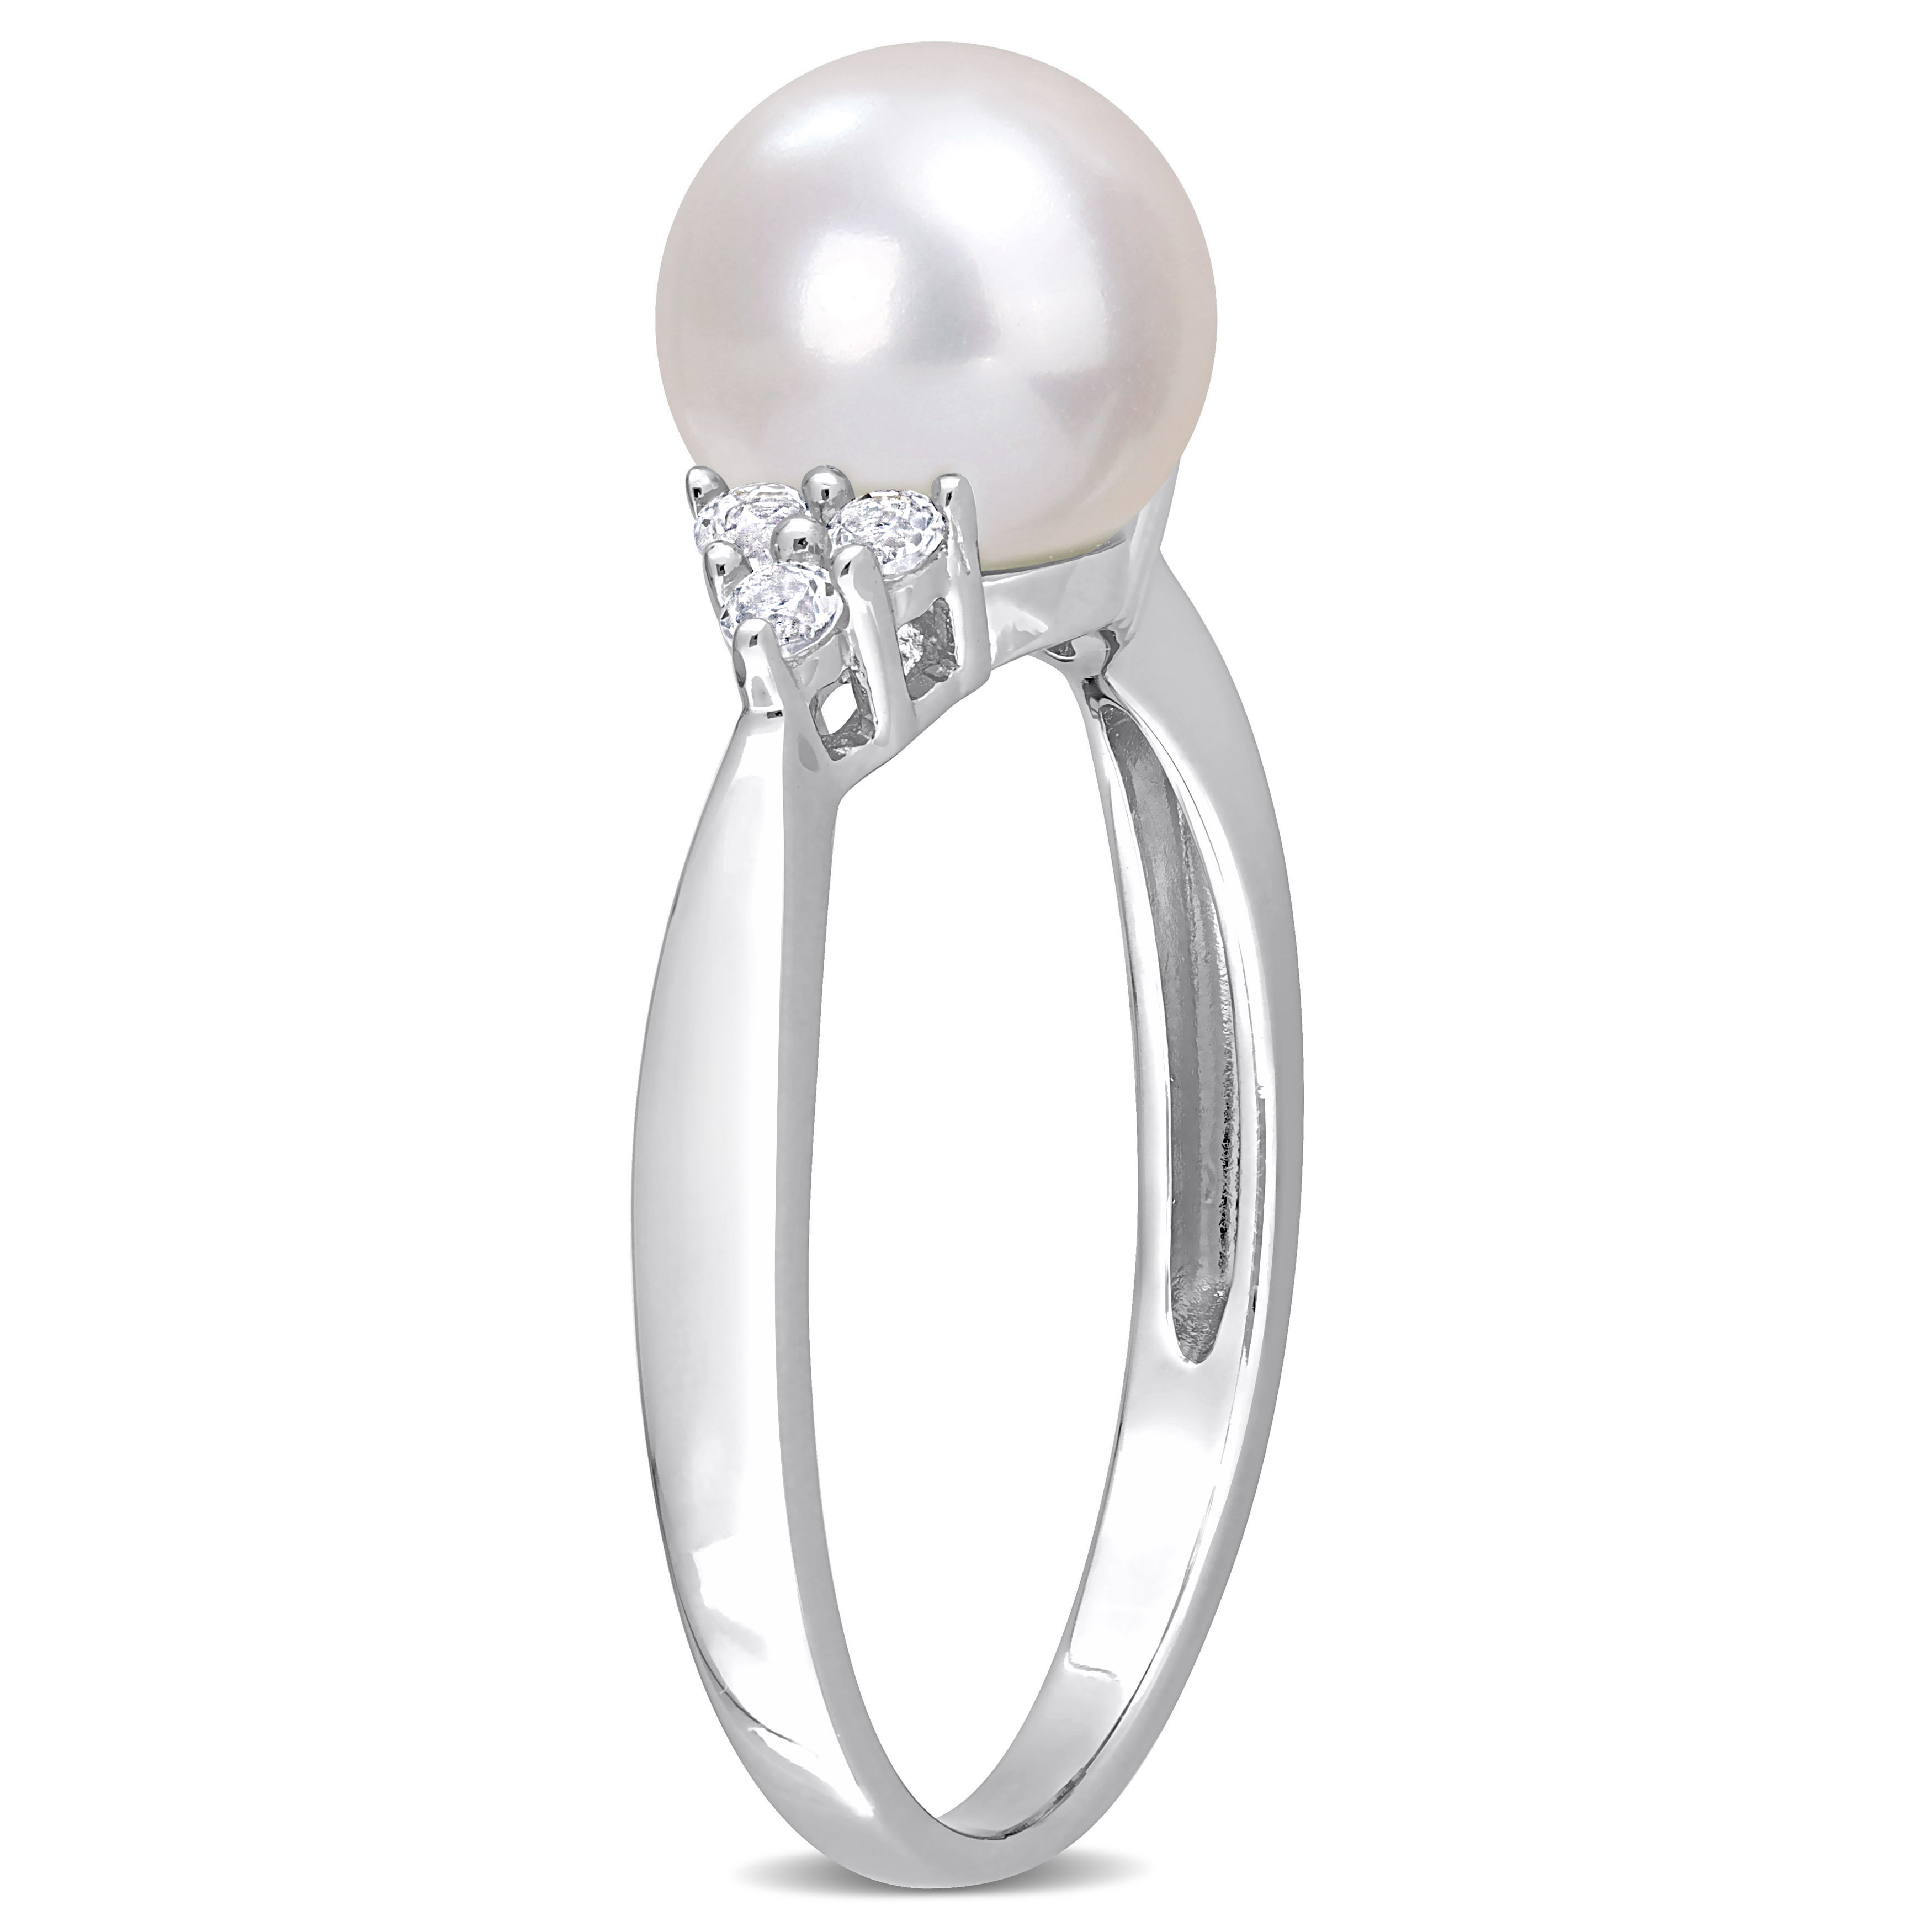 8-8.5MM Cultured Freshwater Pearl and 1/4 CT TGW White Topaz Ring in Sterling Silver